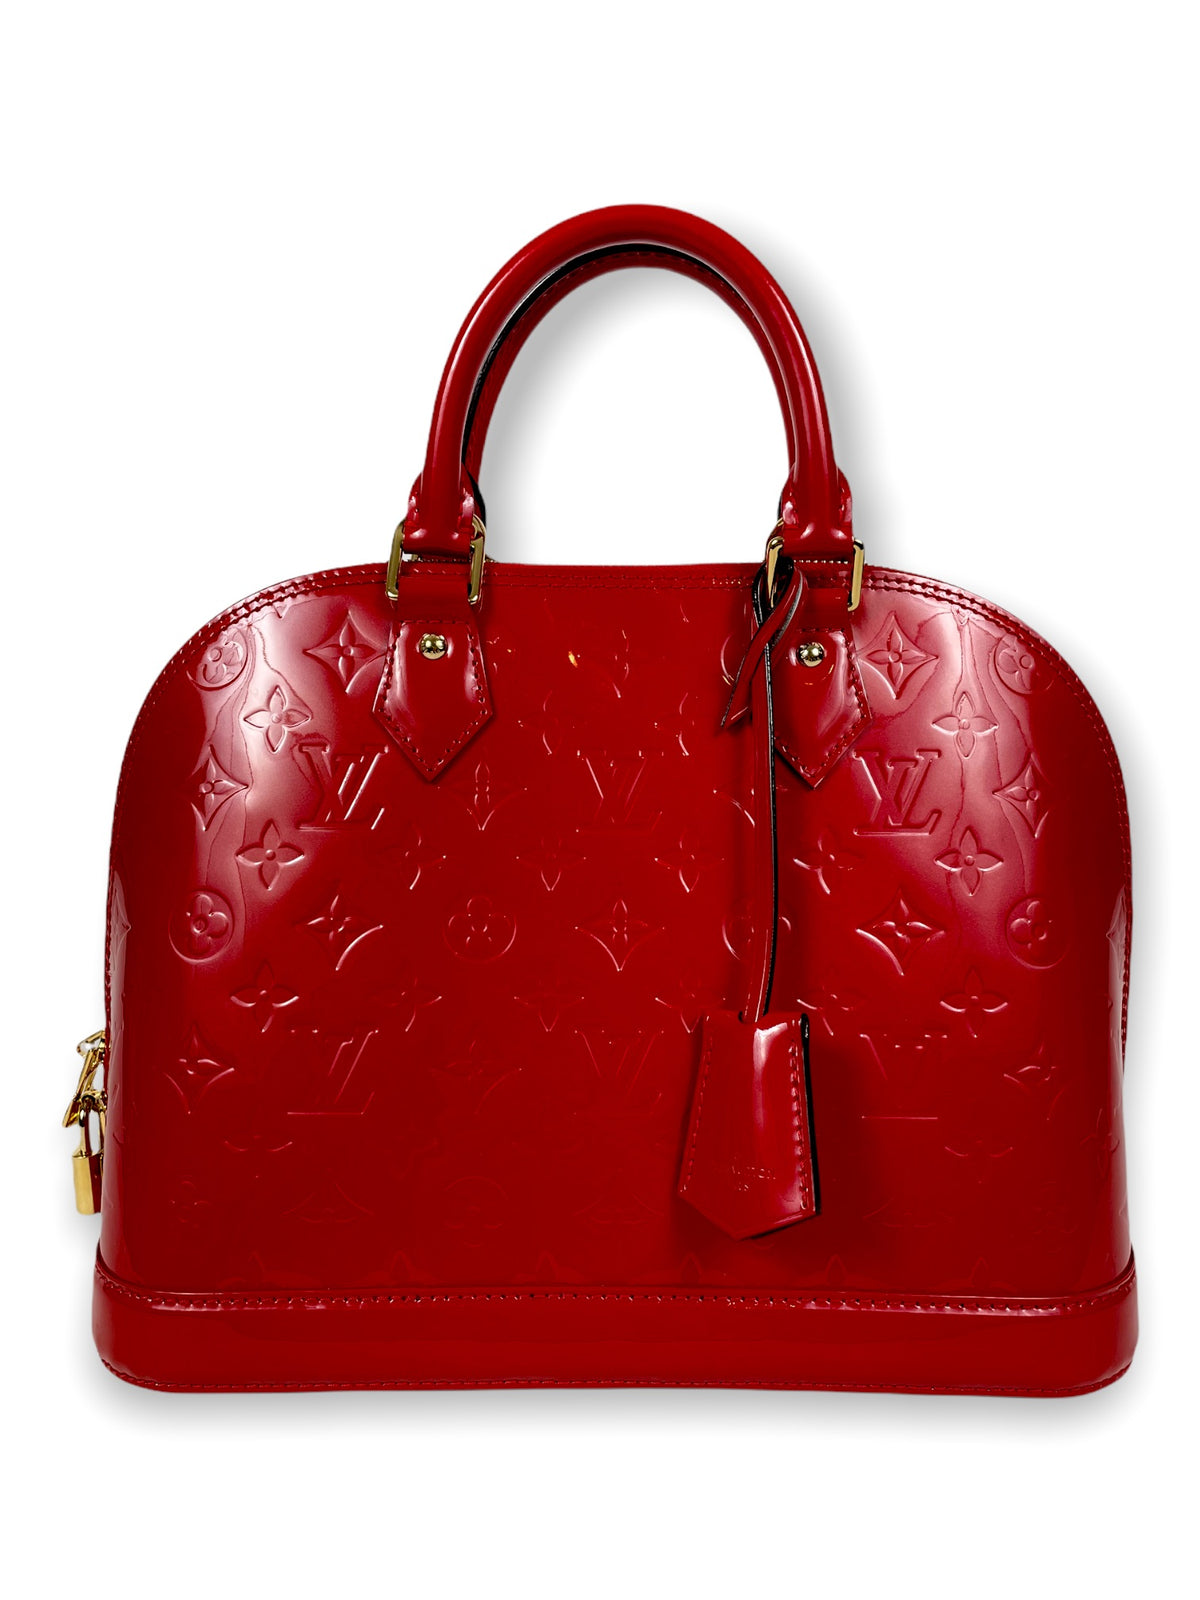 Louis Vuitton - Authenticated Alma Bb Handbag - Patent Leather Red Plain for Women, Very Good Condition